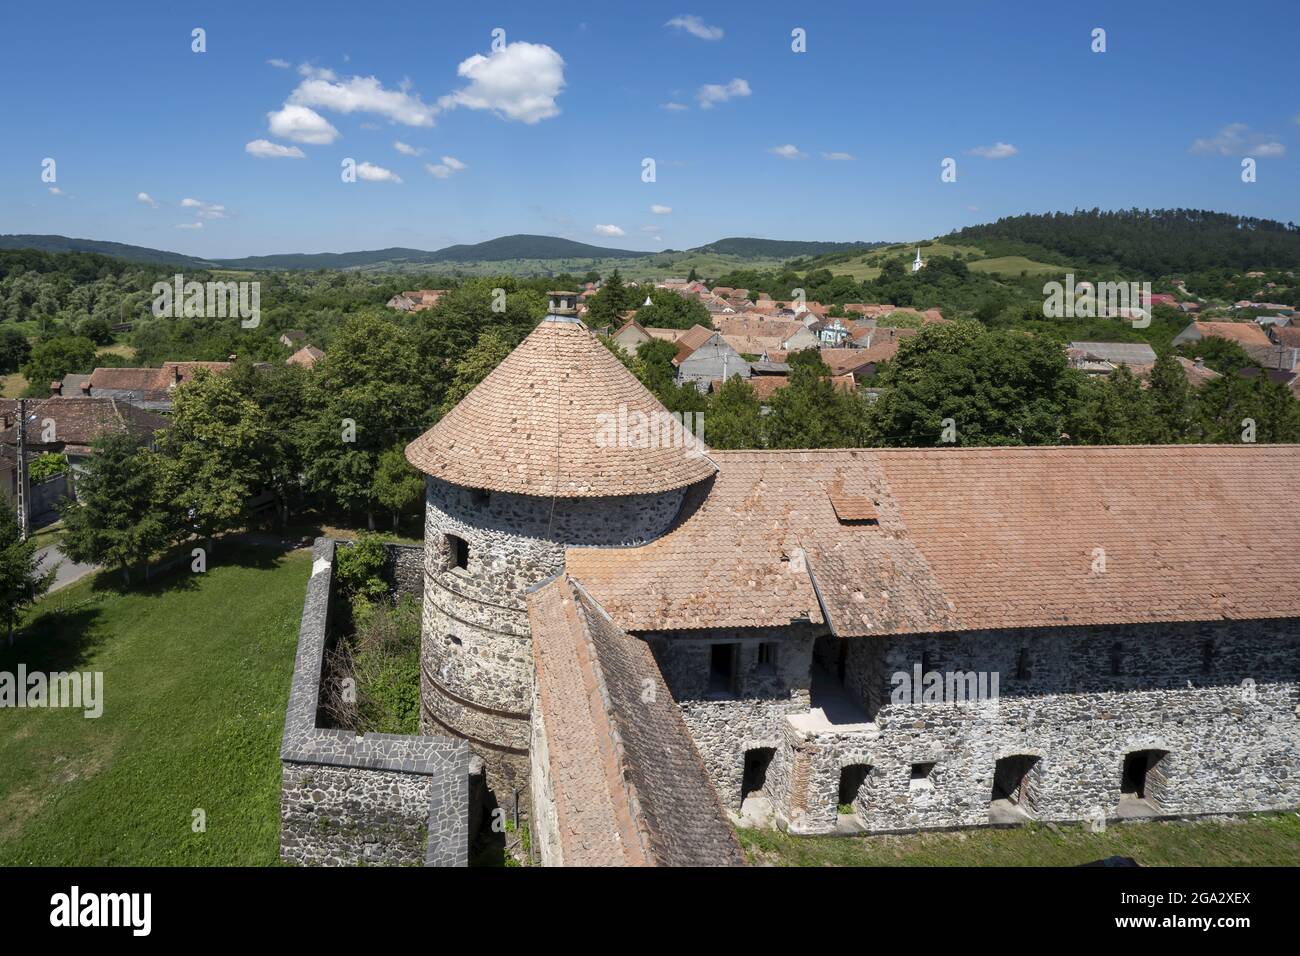 Overlooking the town and the round tower of the Cetatea Bethlen Medieval Castle in Racos; Racos, Transylvania, Romania Stock Photo